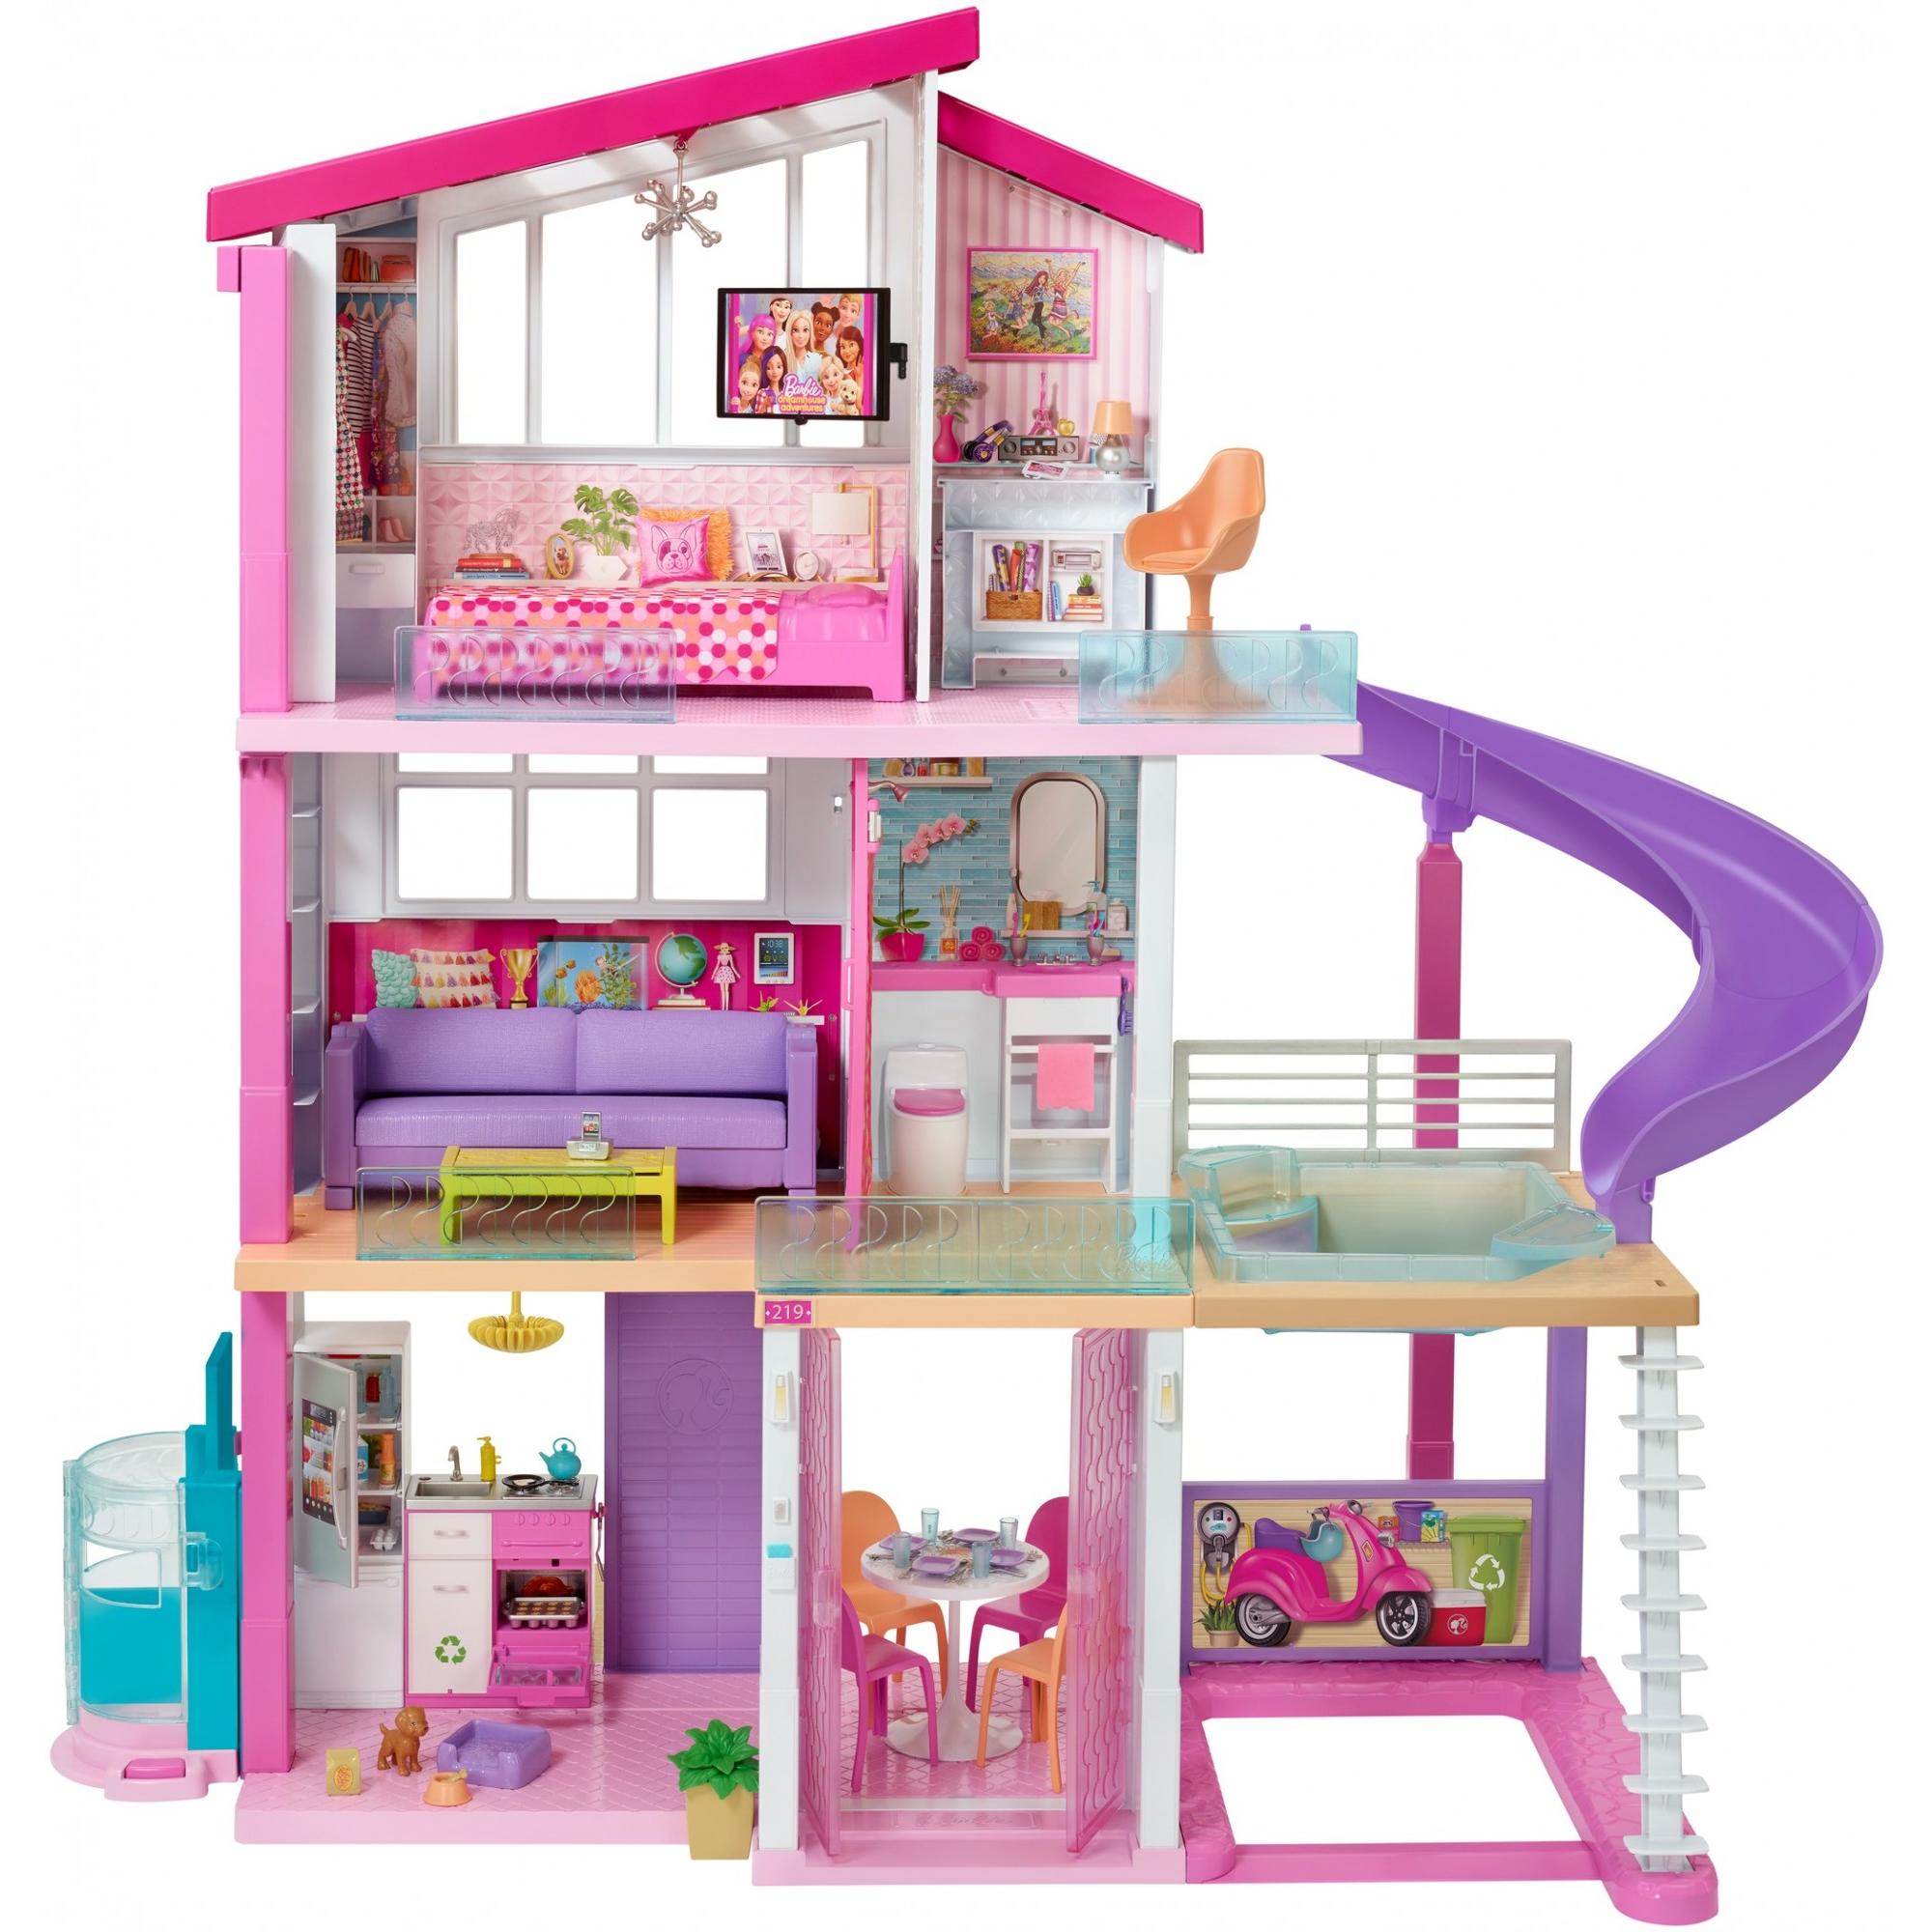 Barbie Dreamhouse 46.5 inch Dollhouse with Elevator, Pool, Slide and 70 Accessories Including Furniture and Household Items, Gift for 3 to 7 Year Olds, assembly required - image 1 of 12